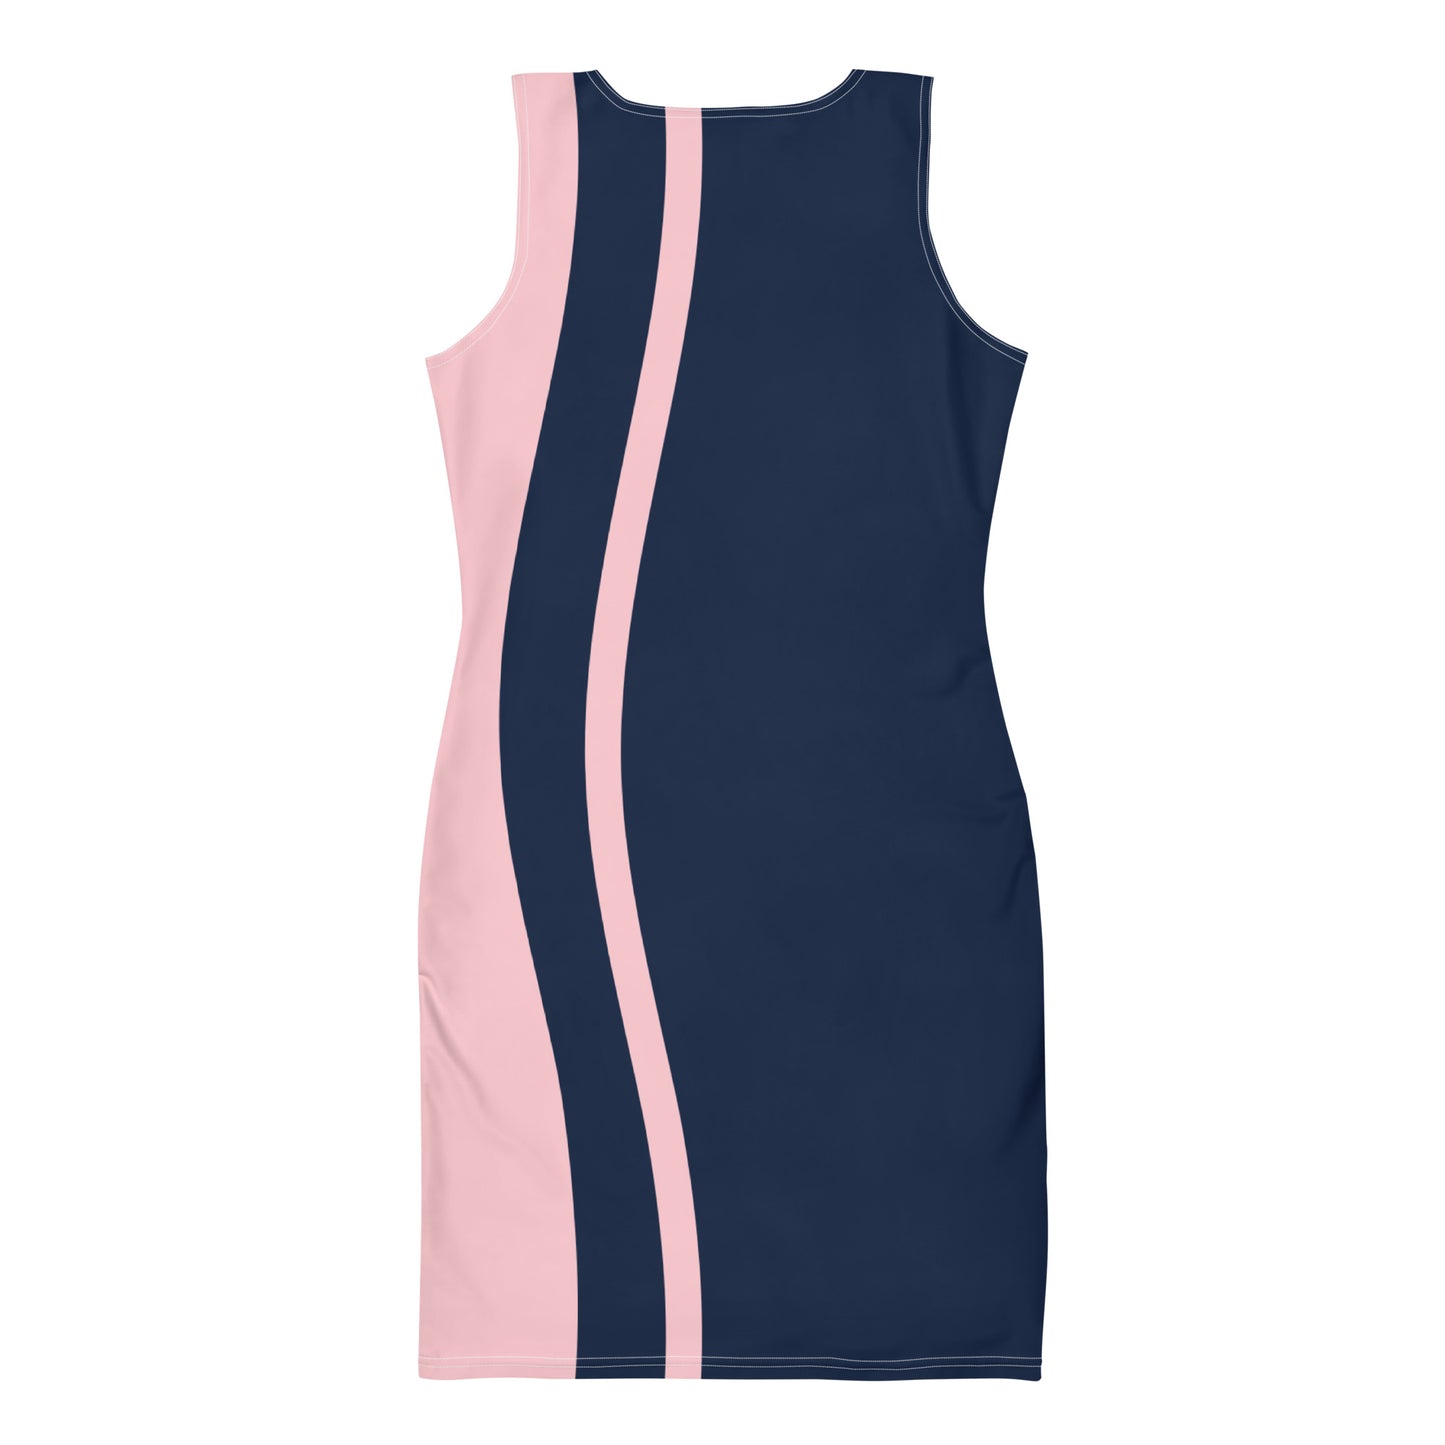 Blue bodycon dress with pink stripes